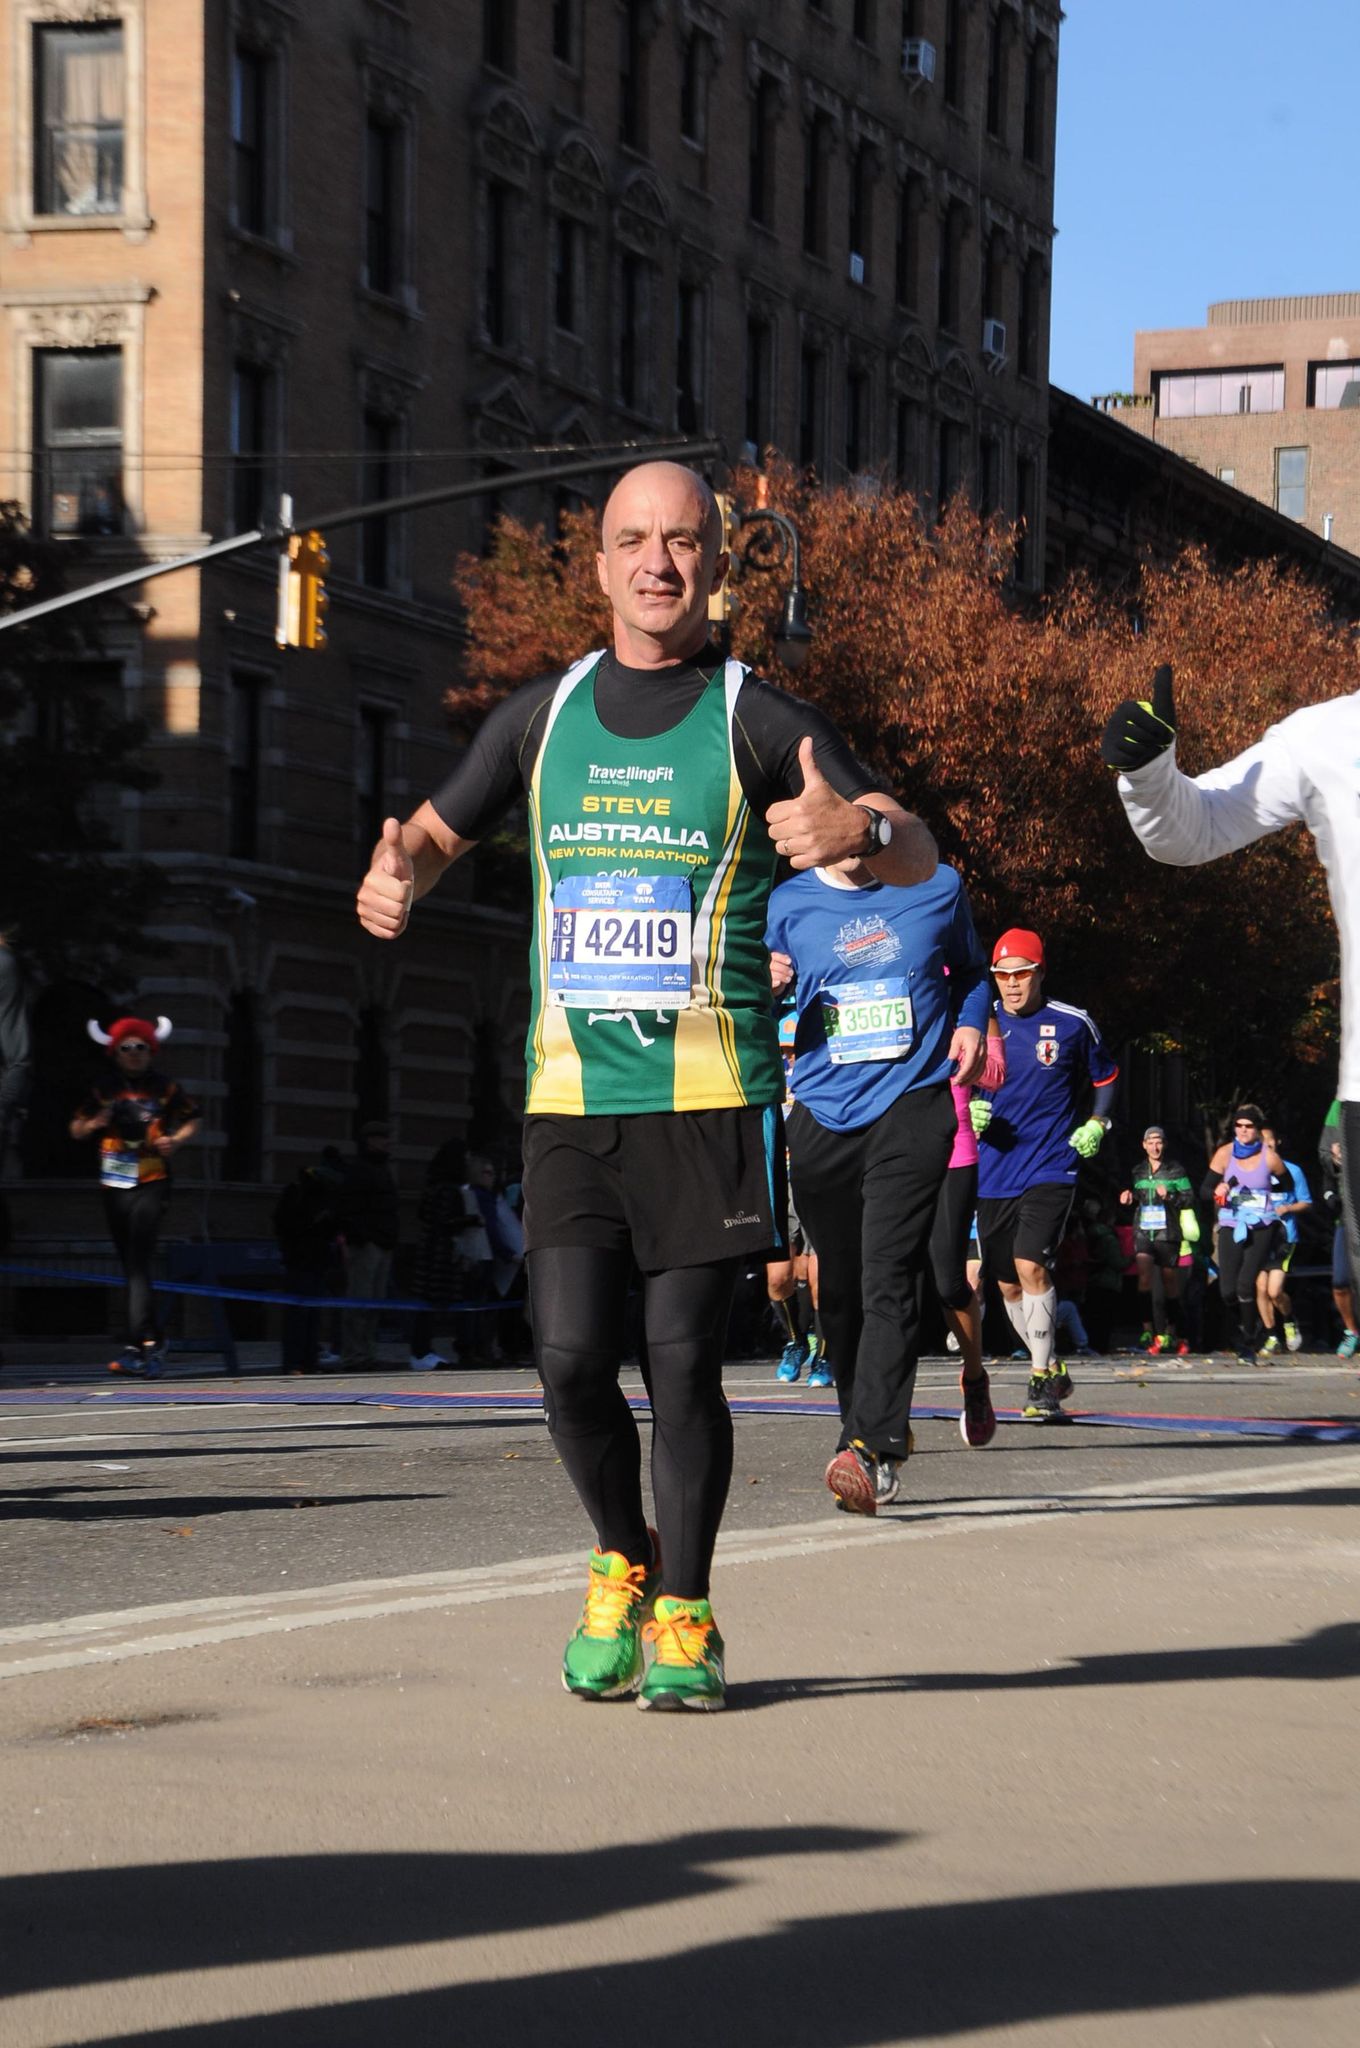 A marathon runner gives the thumbs up as he comes down a city street.